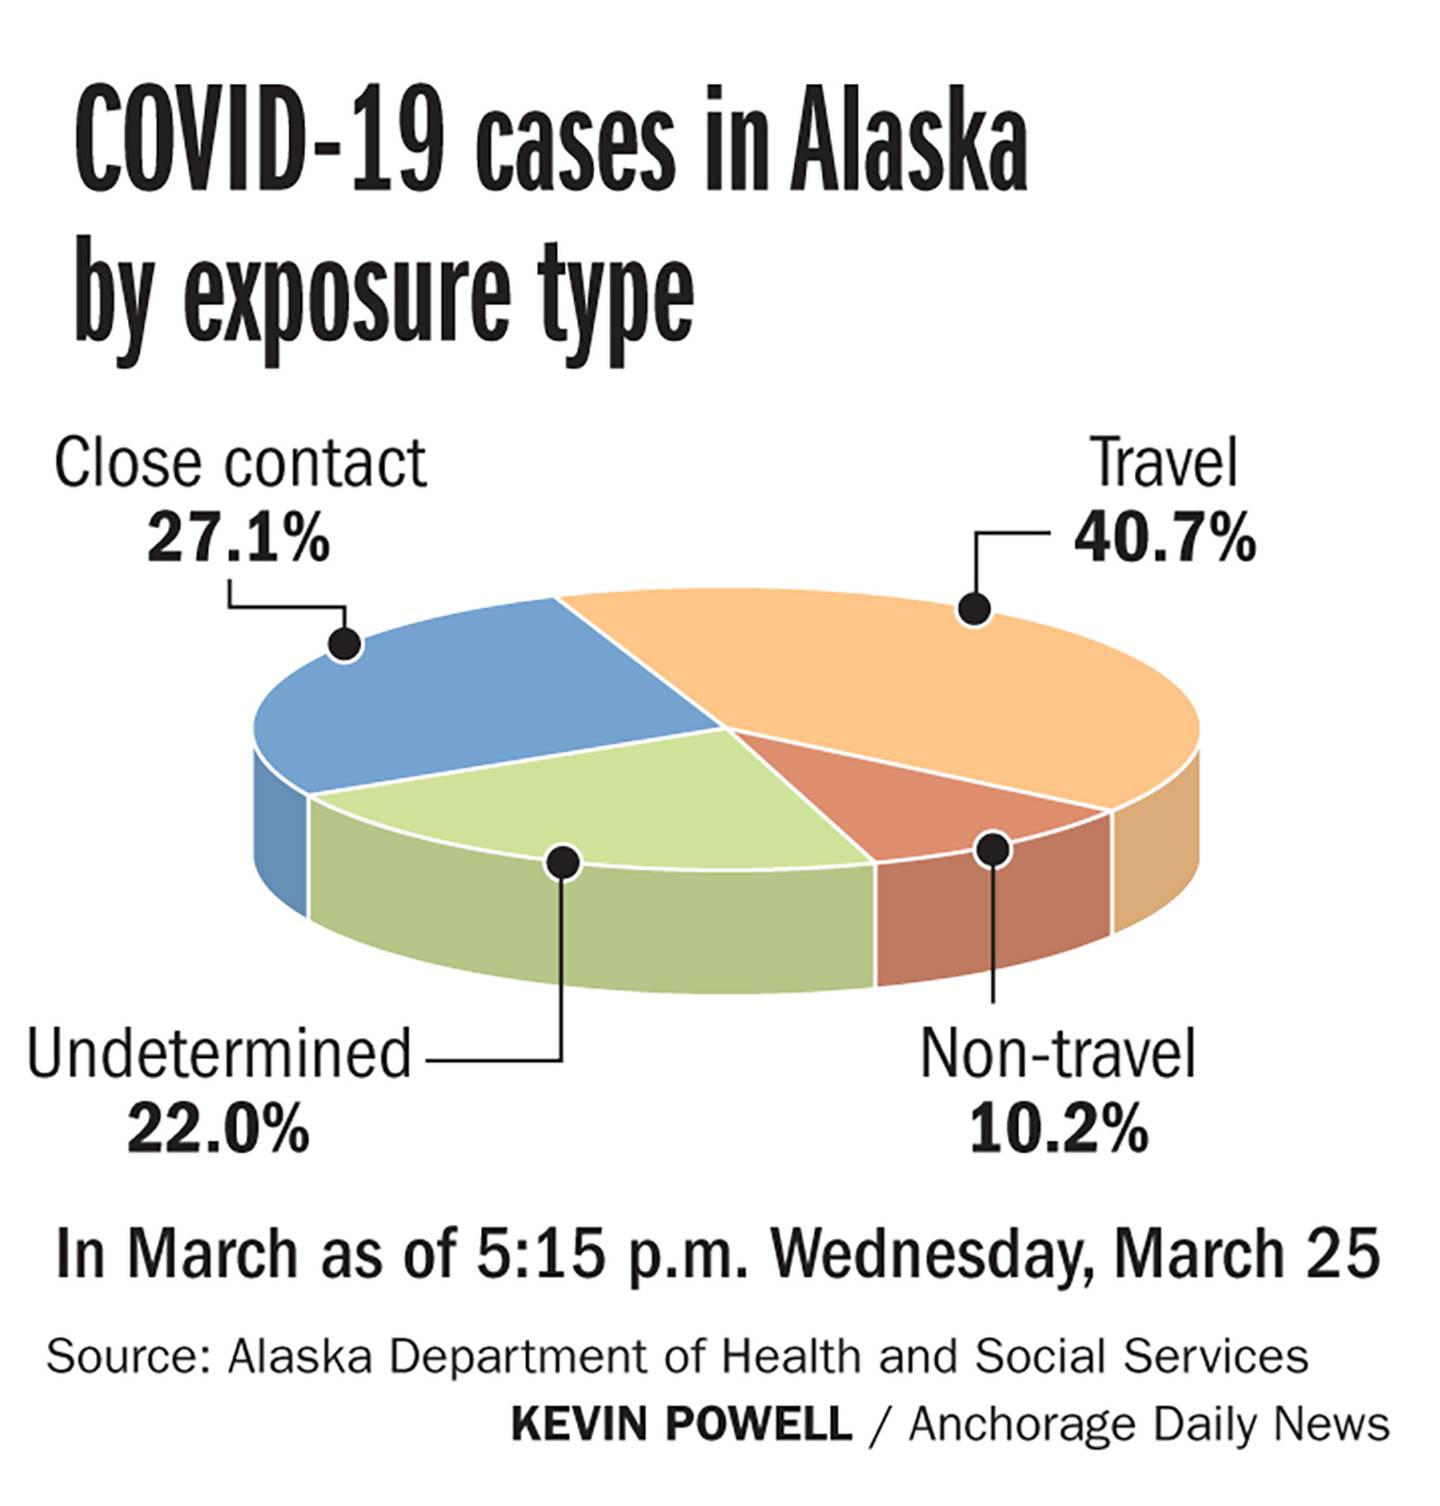 COVID-19 cases in Alaska by exposure type